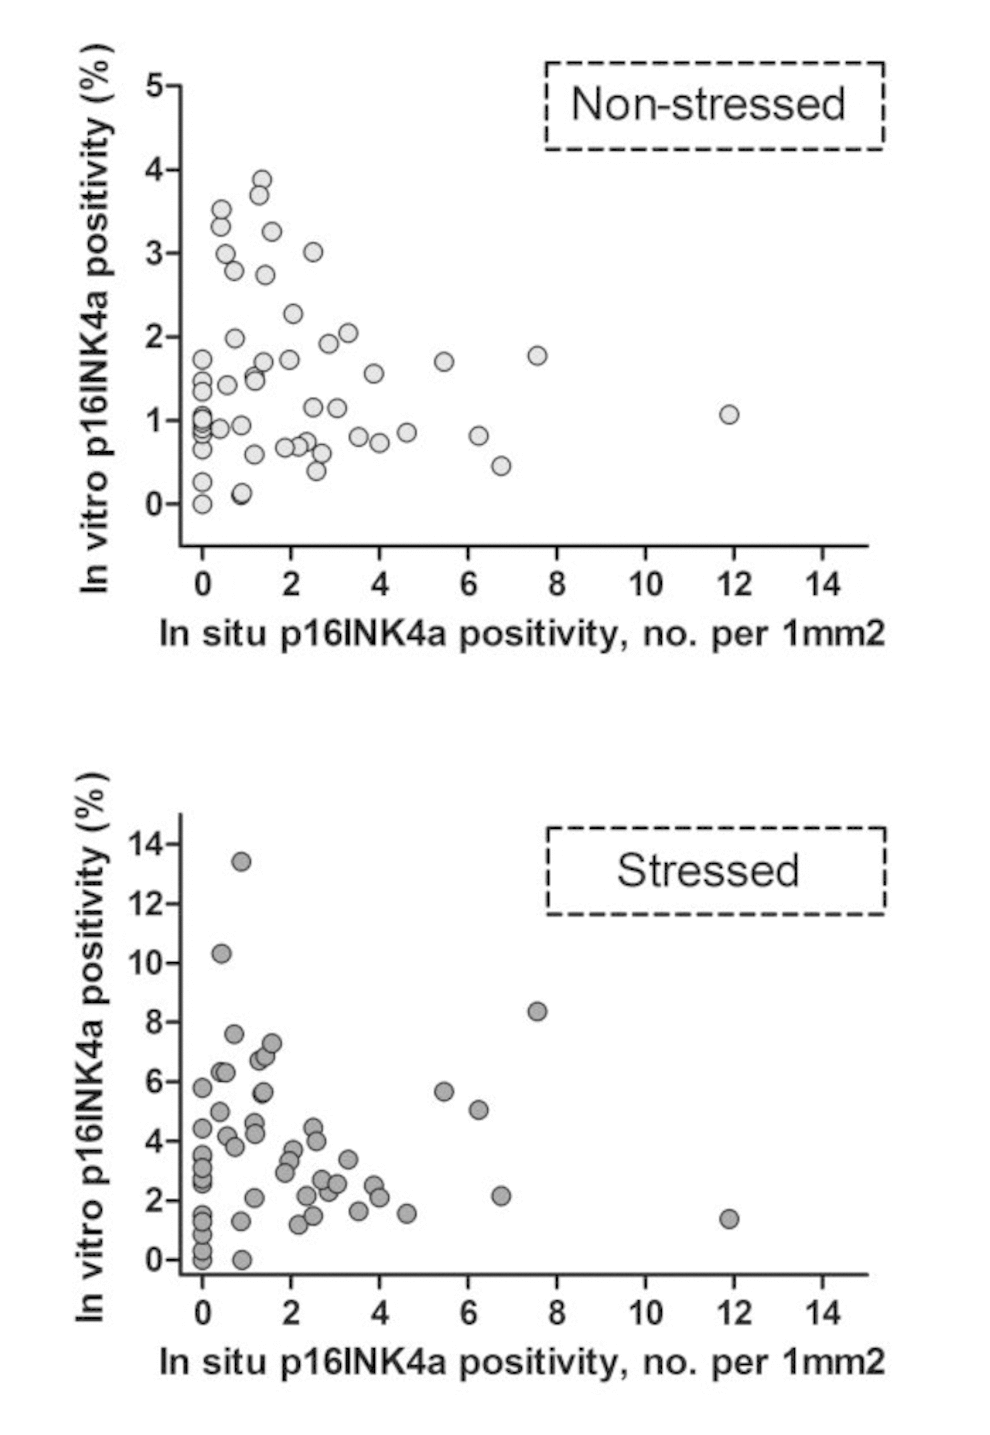 Intra-individual correlations: in vitro versus in situ p16INK4a positivity. Each dot represents an individual donor, N=52. In vitro p16INK4a positivity: percentage of p16INK4a positive cells - mean of experiments I and II. In situ p16INK4a positivity: number of p16INK4a positive cells per 1mm2 dermis. Uncorrected (not log transformed) data points are shown.